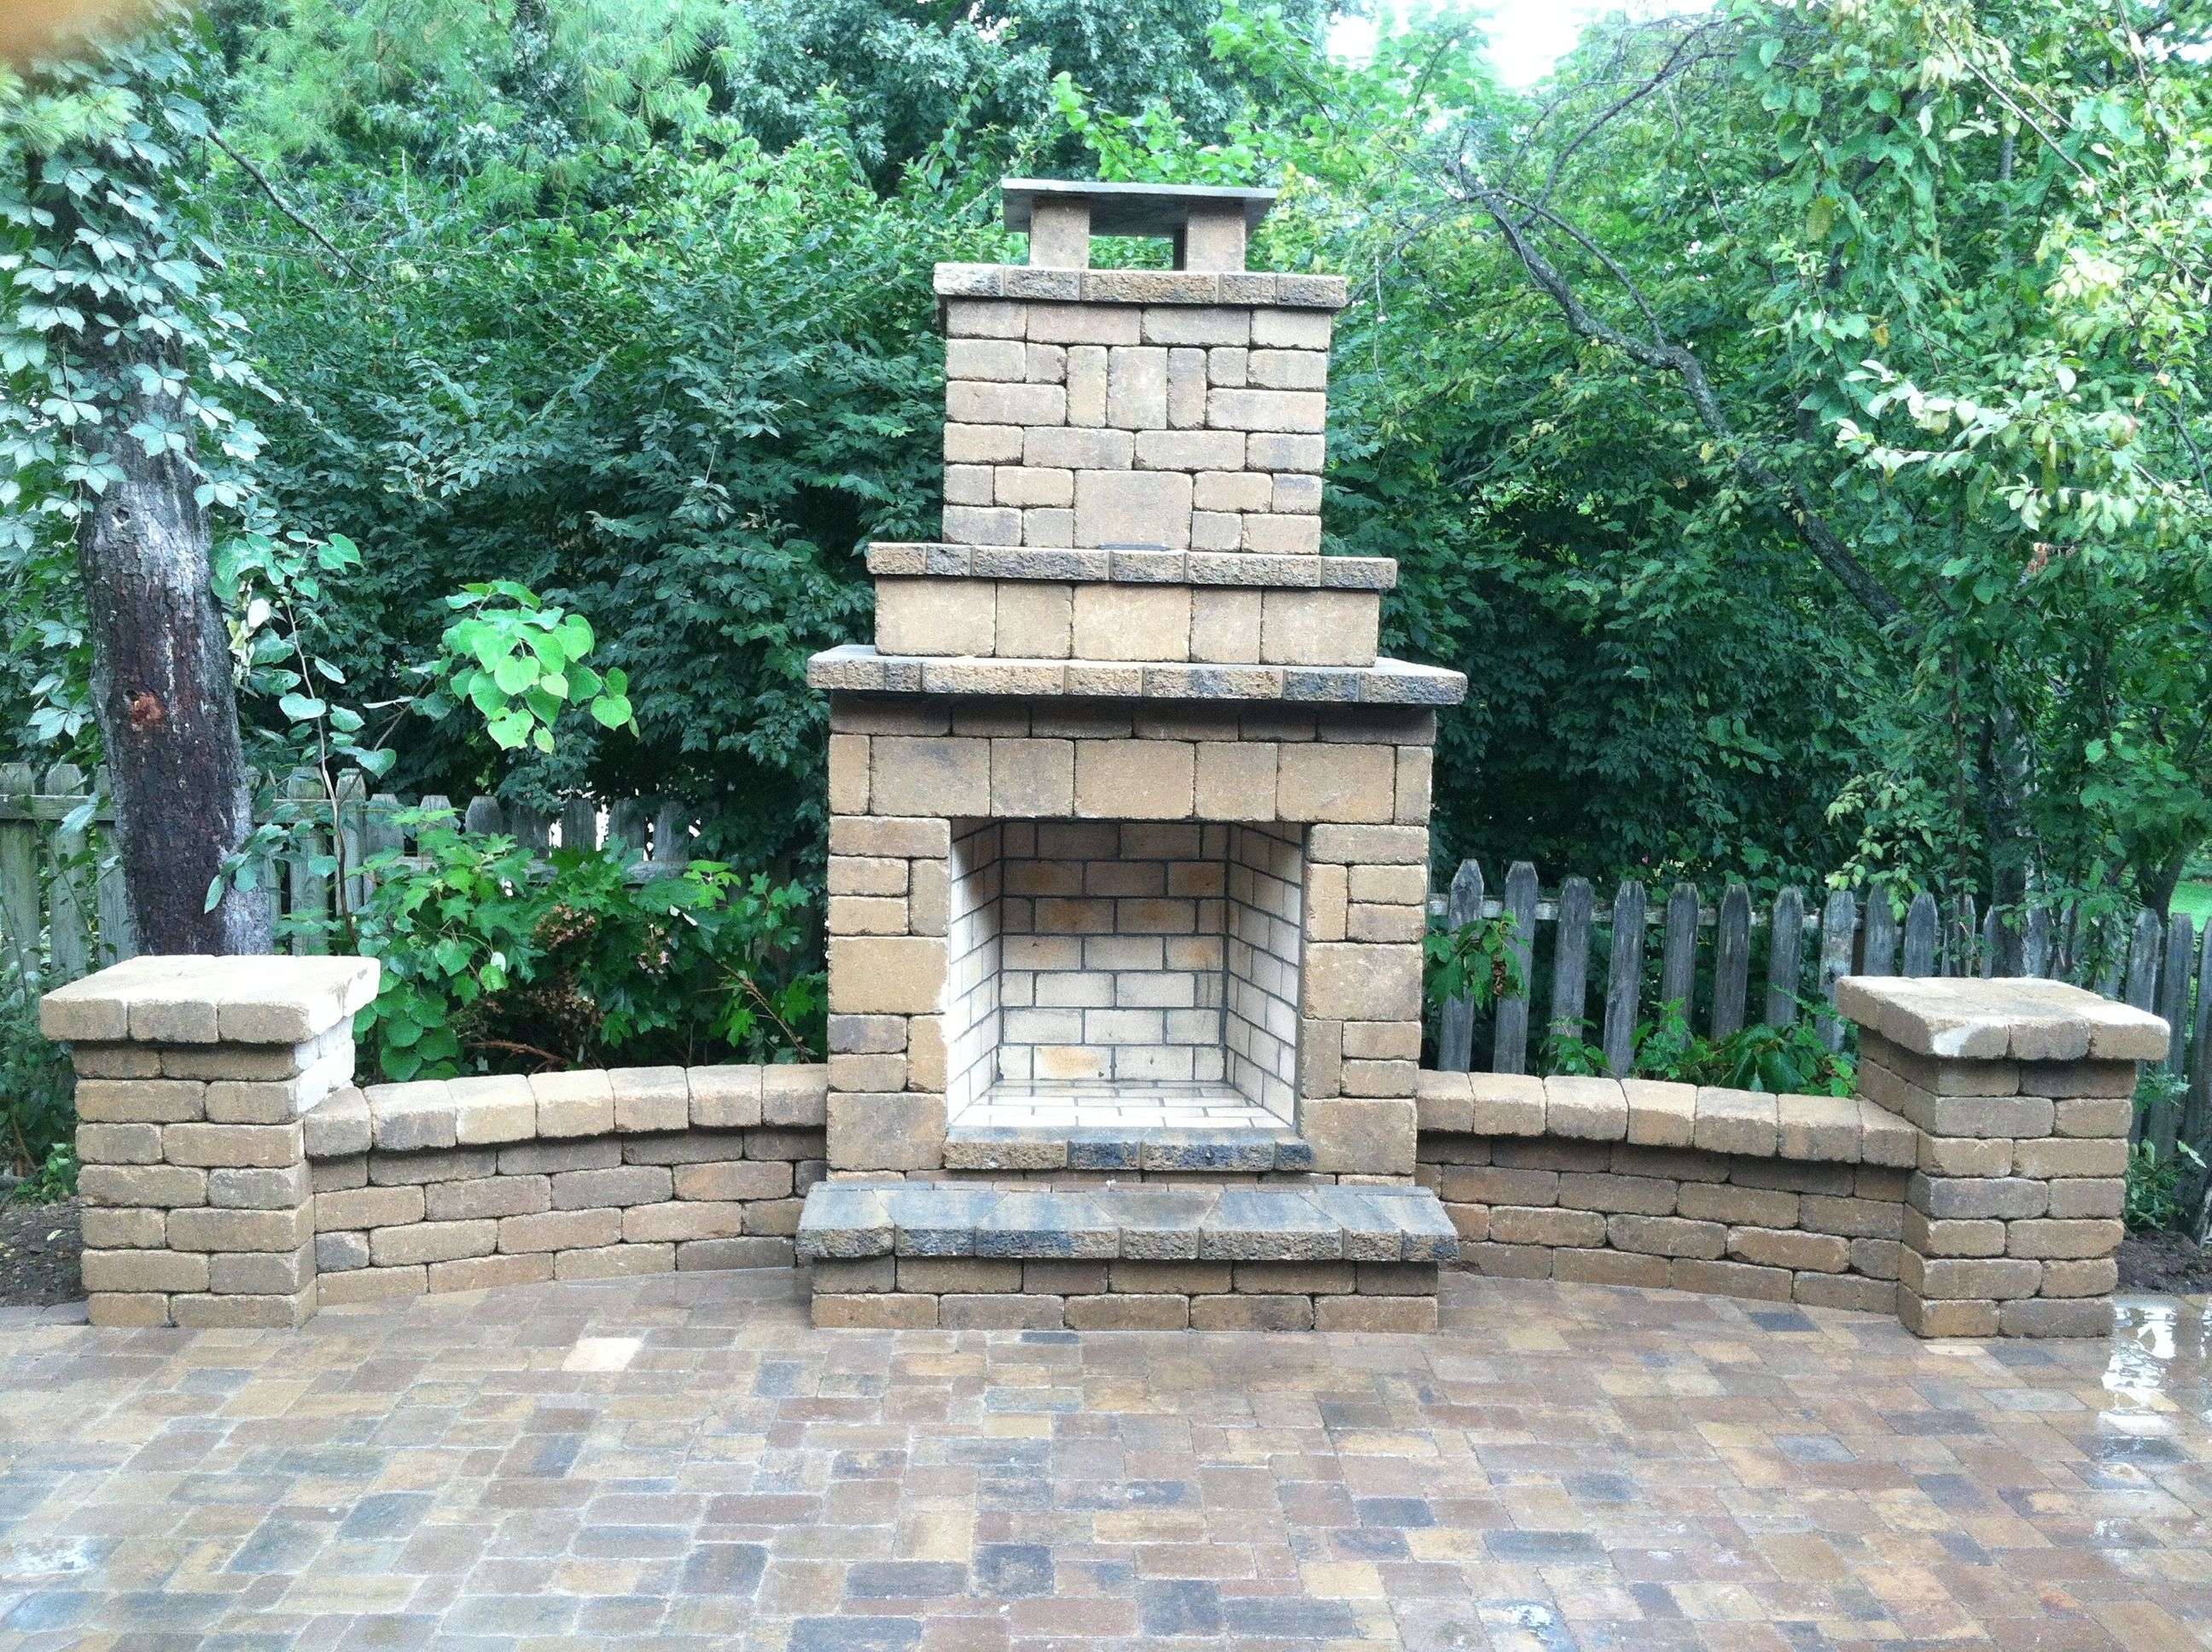 Inexpensive Outdoor Fireplace And Brick Paver Patio